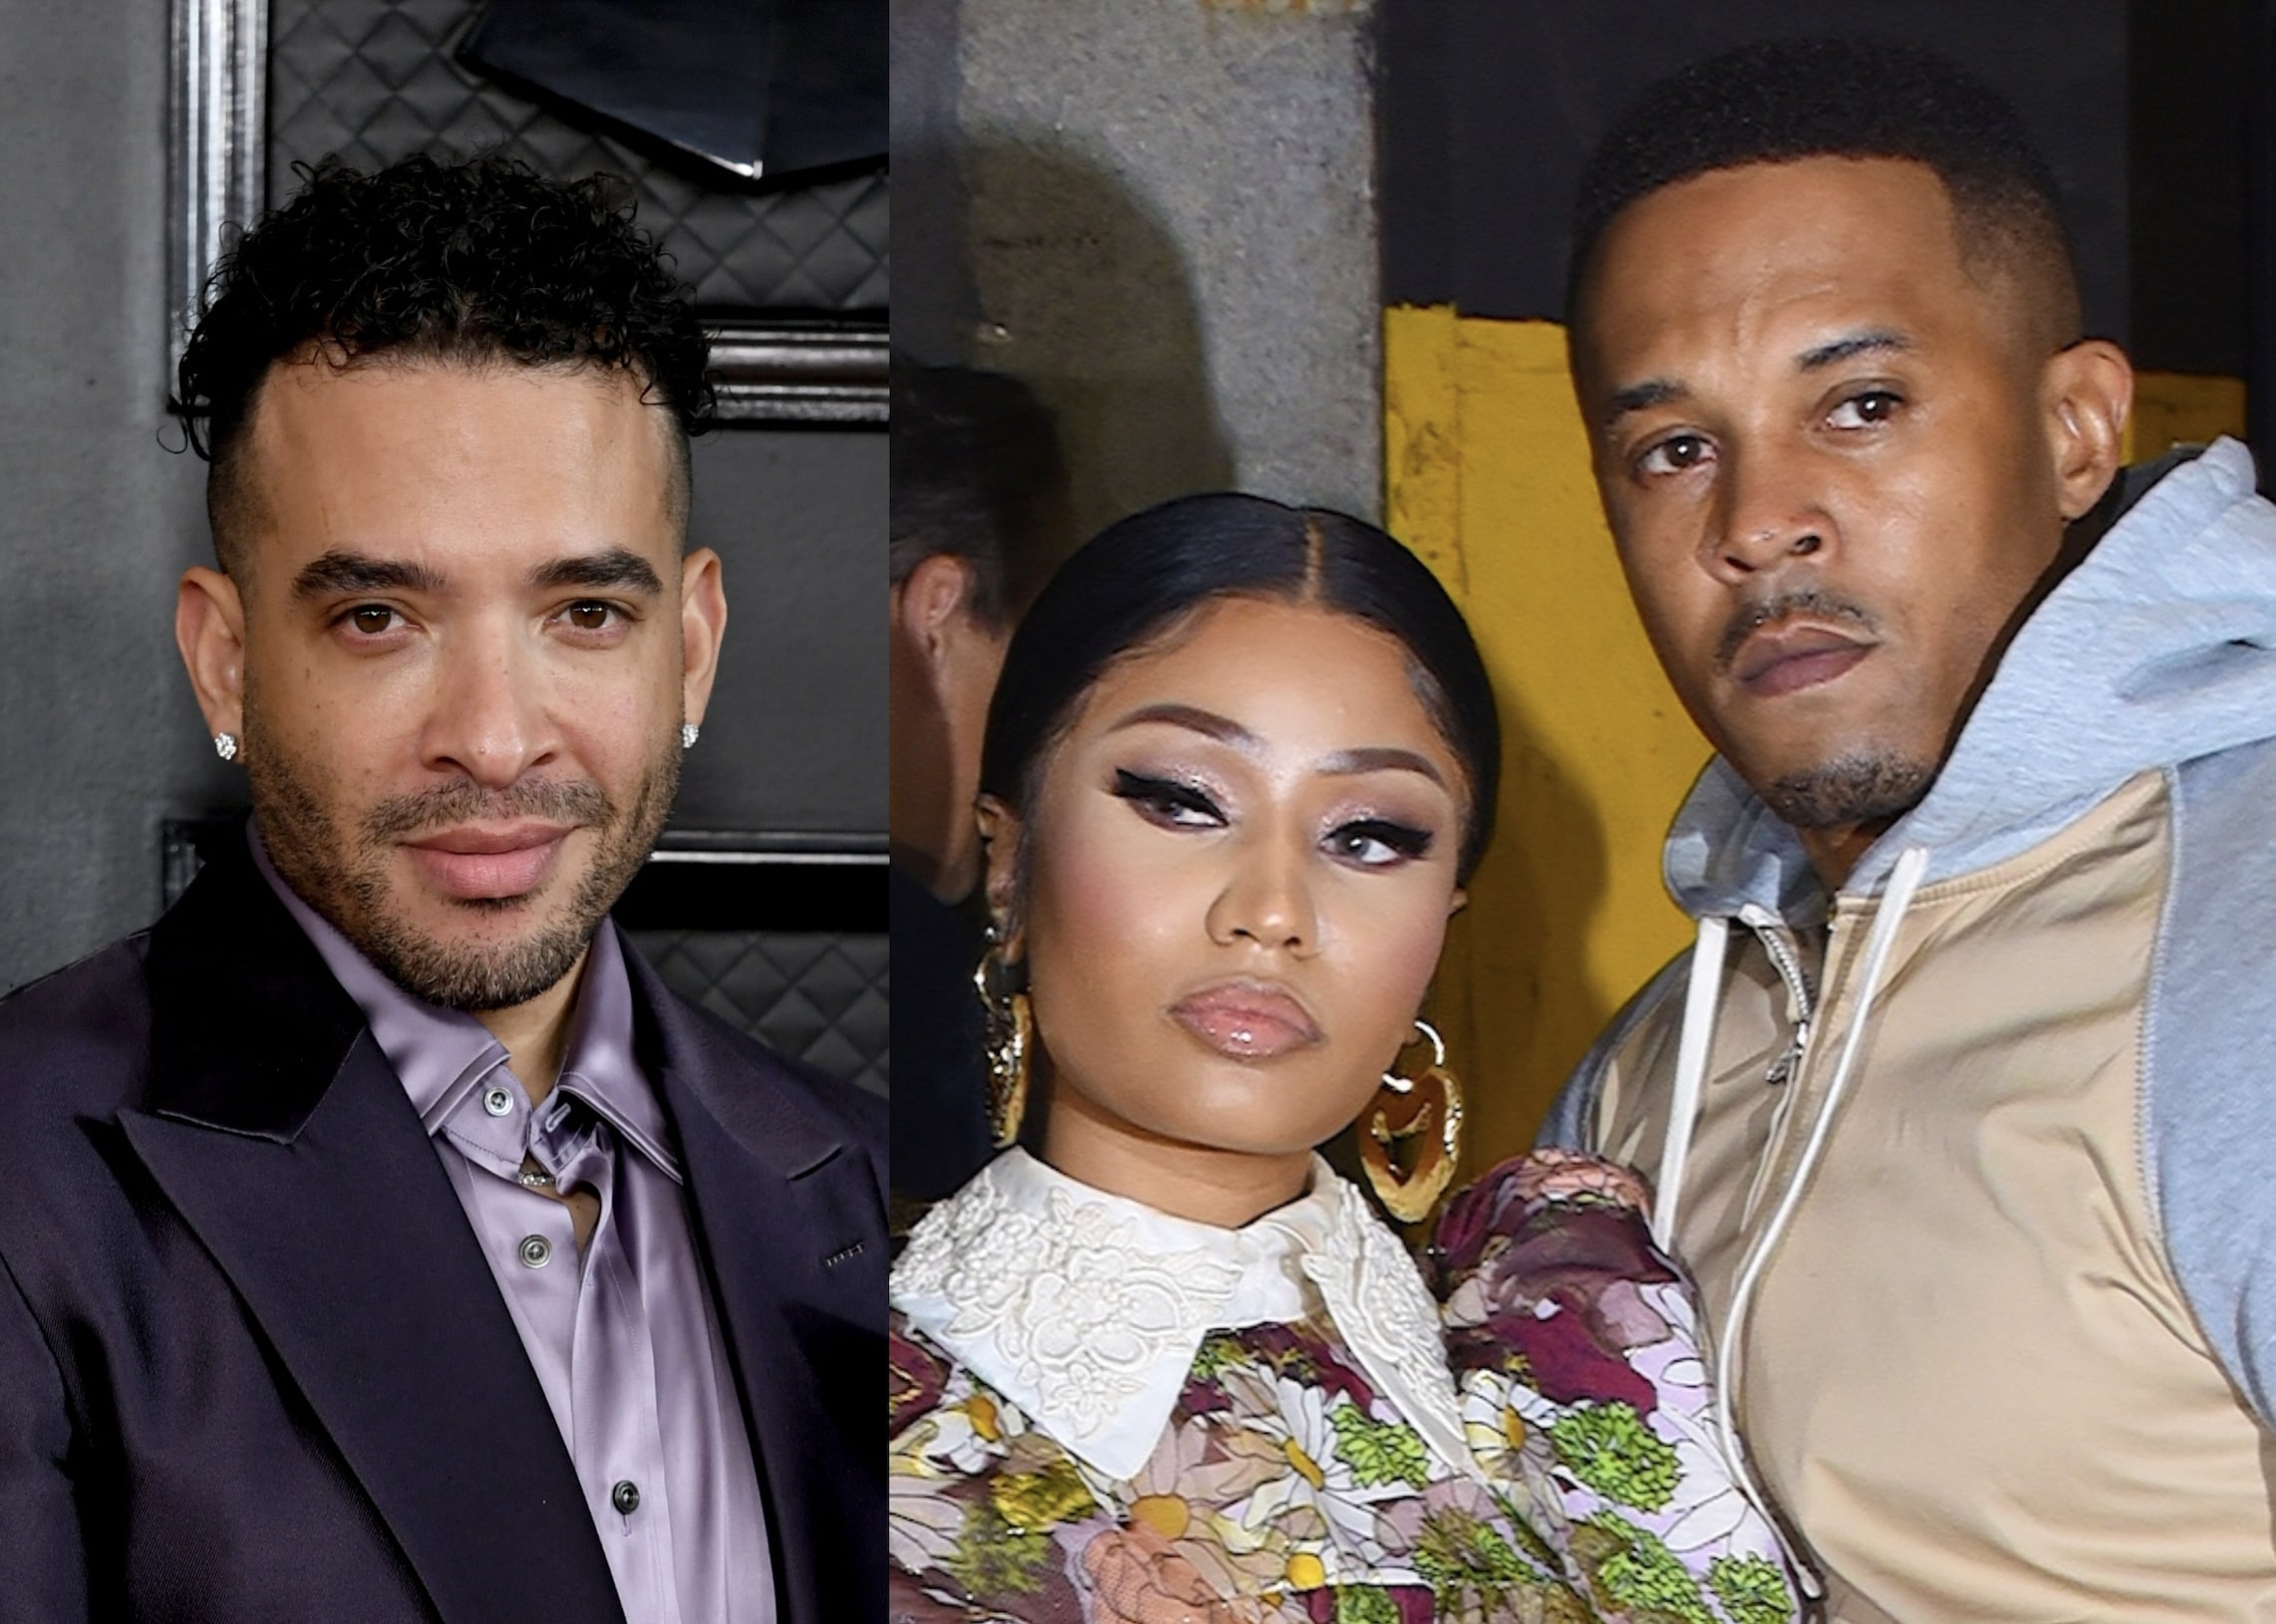 Jason Lee Targeted By Nicki Minaj, Kenneth Petty, And Their Affiliates: Report